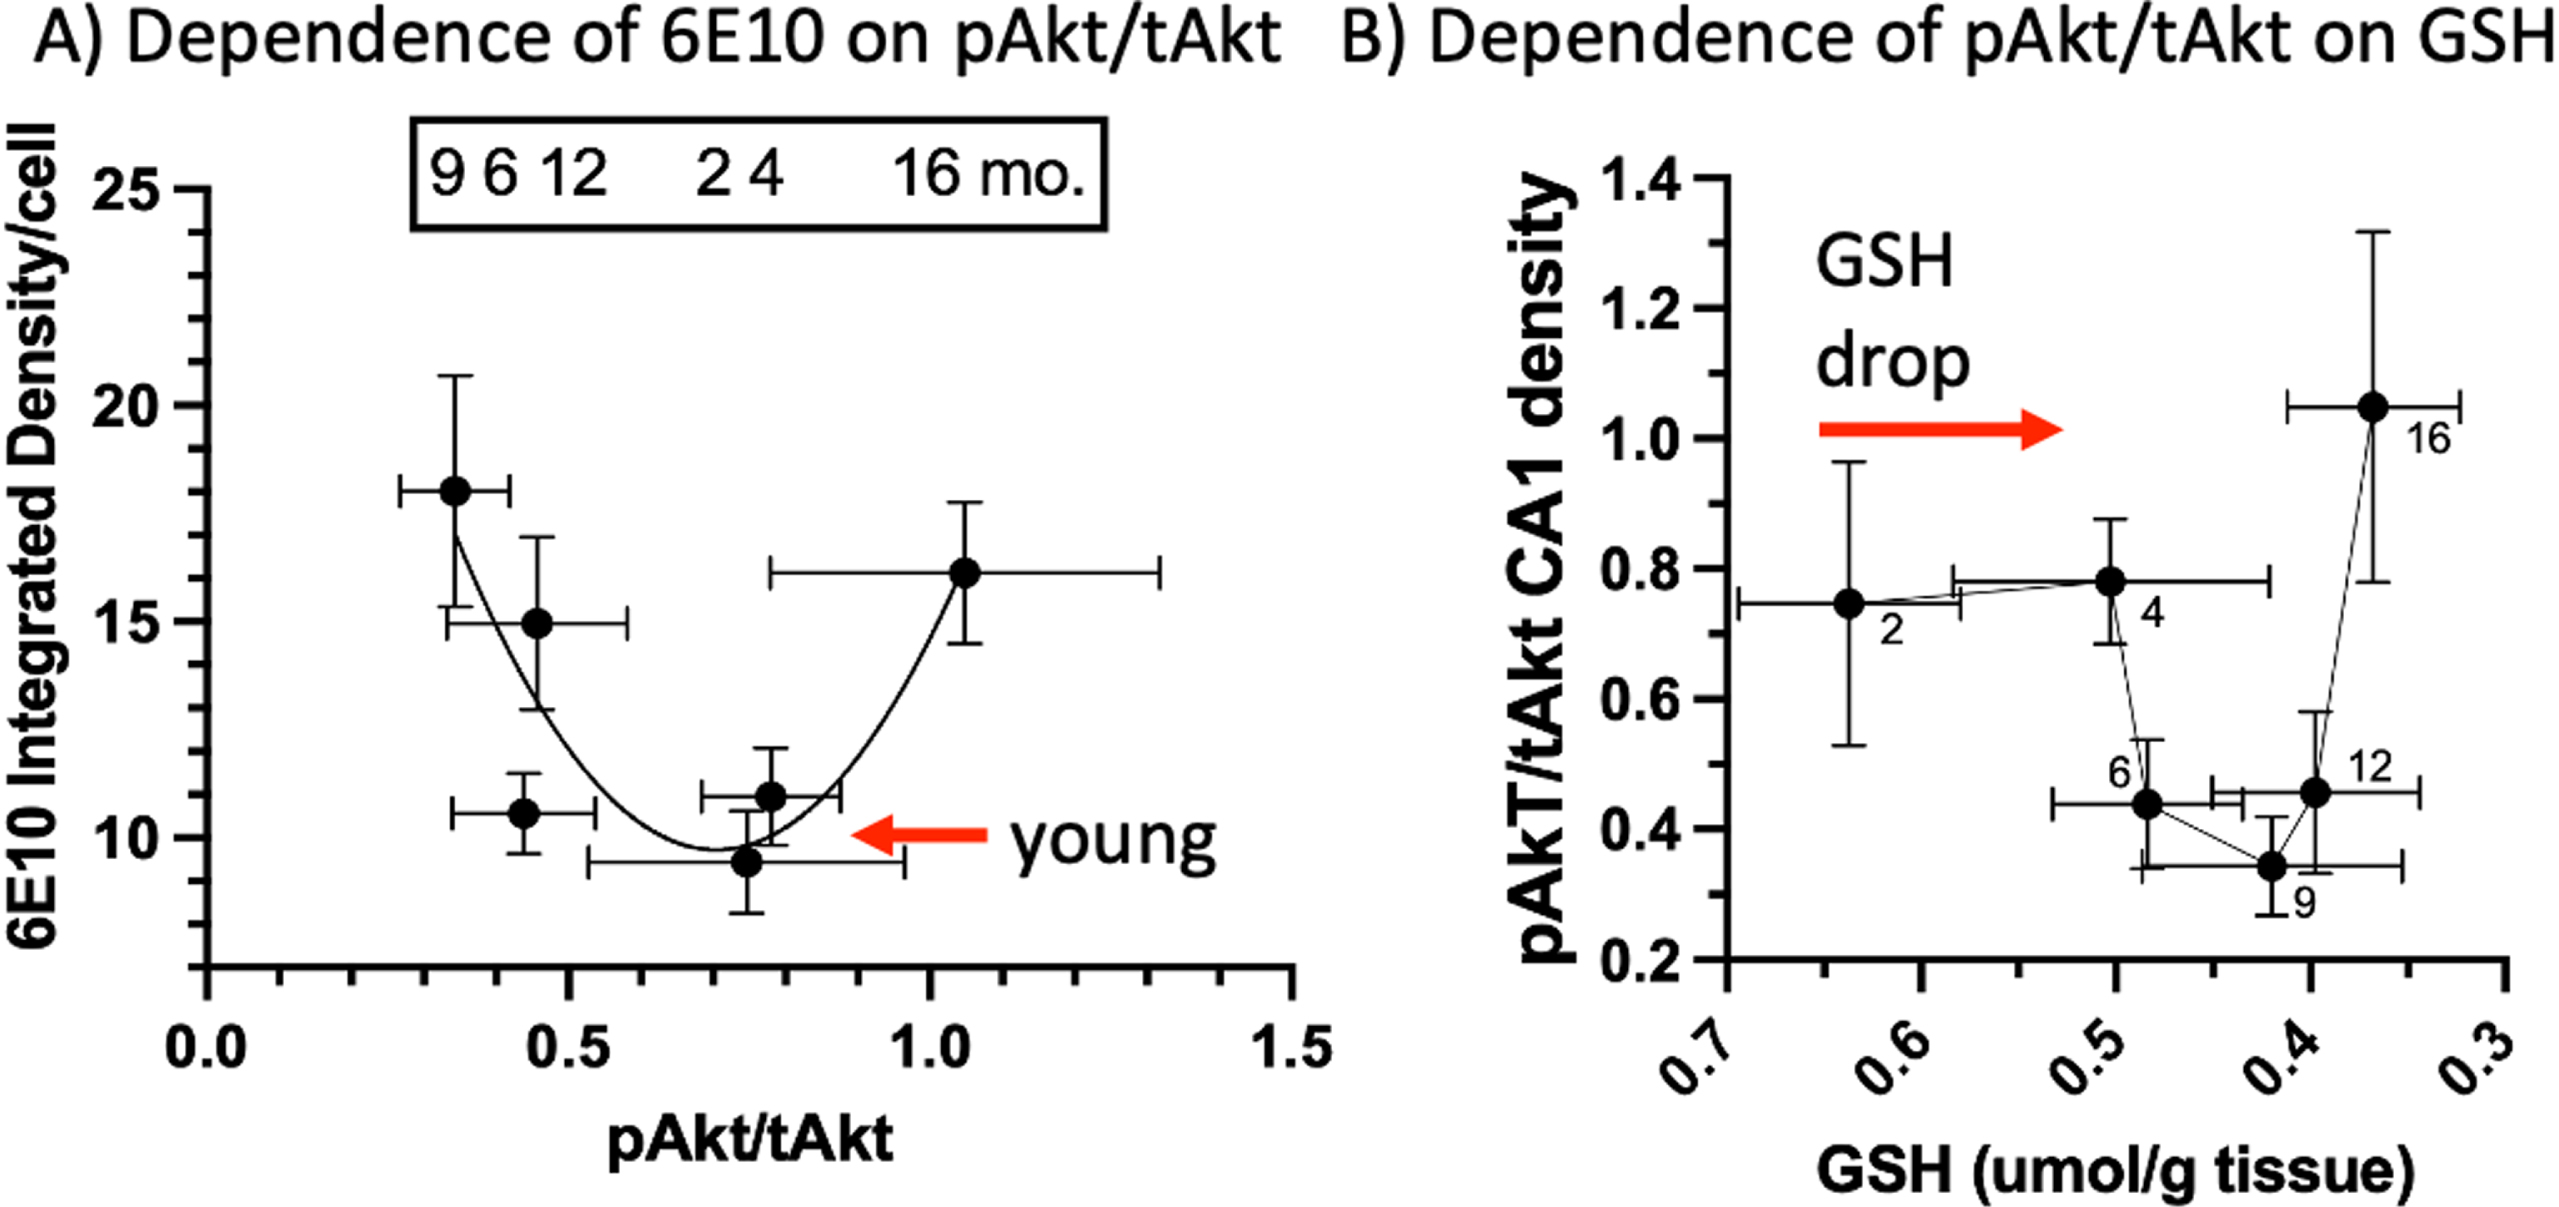 U-shaped correlations of pAkt/tAkt with 6E10 Aβ and GSH. A) Mid-range pAkt/tAkt correlates with low intracellular CA1 6E10 while declines or elevations in this ratio correlate with higher 6E10 levels. B) Before a change in pAkt/tAkt ratios, GSH drops 23% from 2 to 4 months followed by a decline in pAkt/tAkt, then a rise in ratio as GSH declines further (reverse scale).